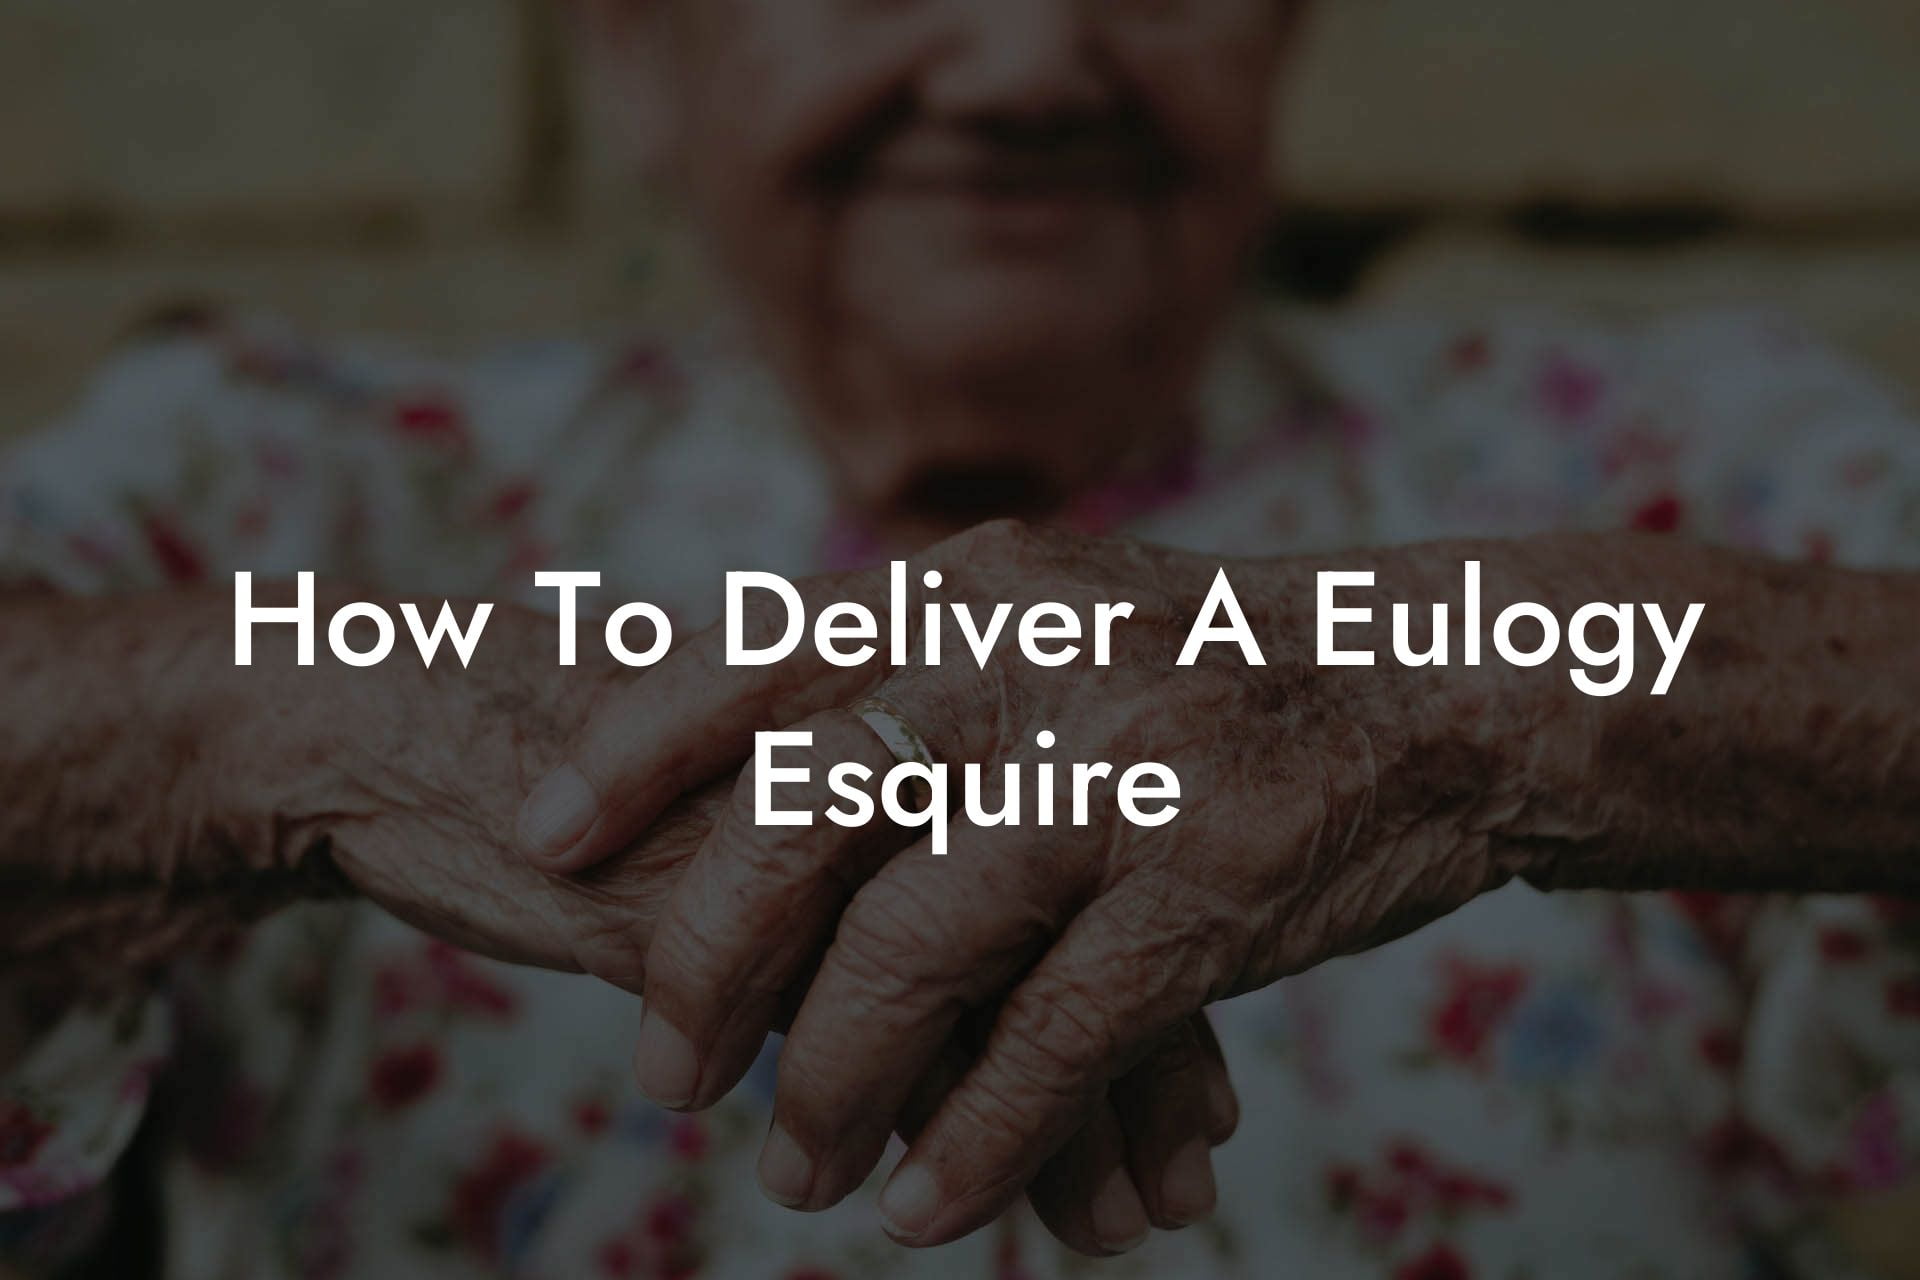 How To Deliver A Eulogy Esquire